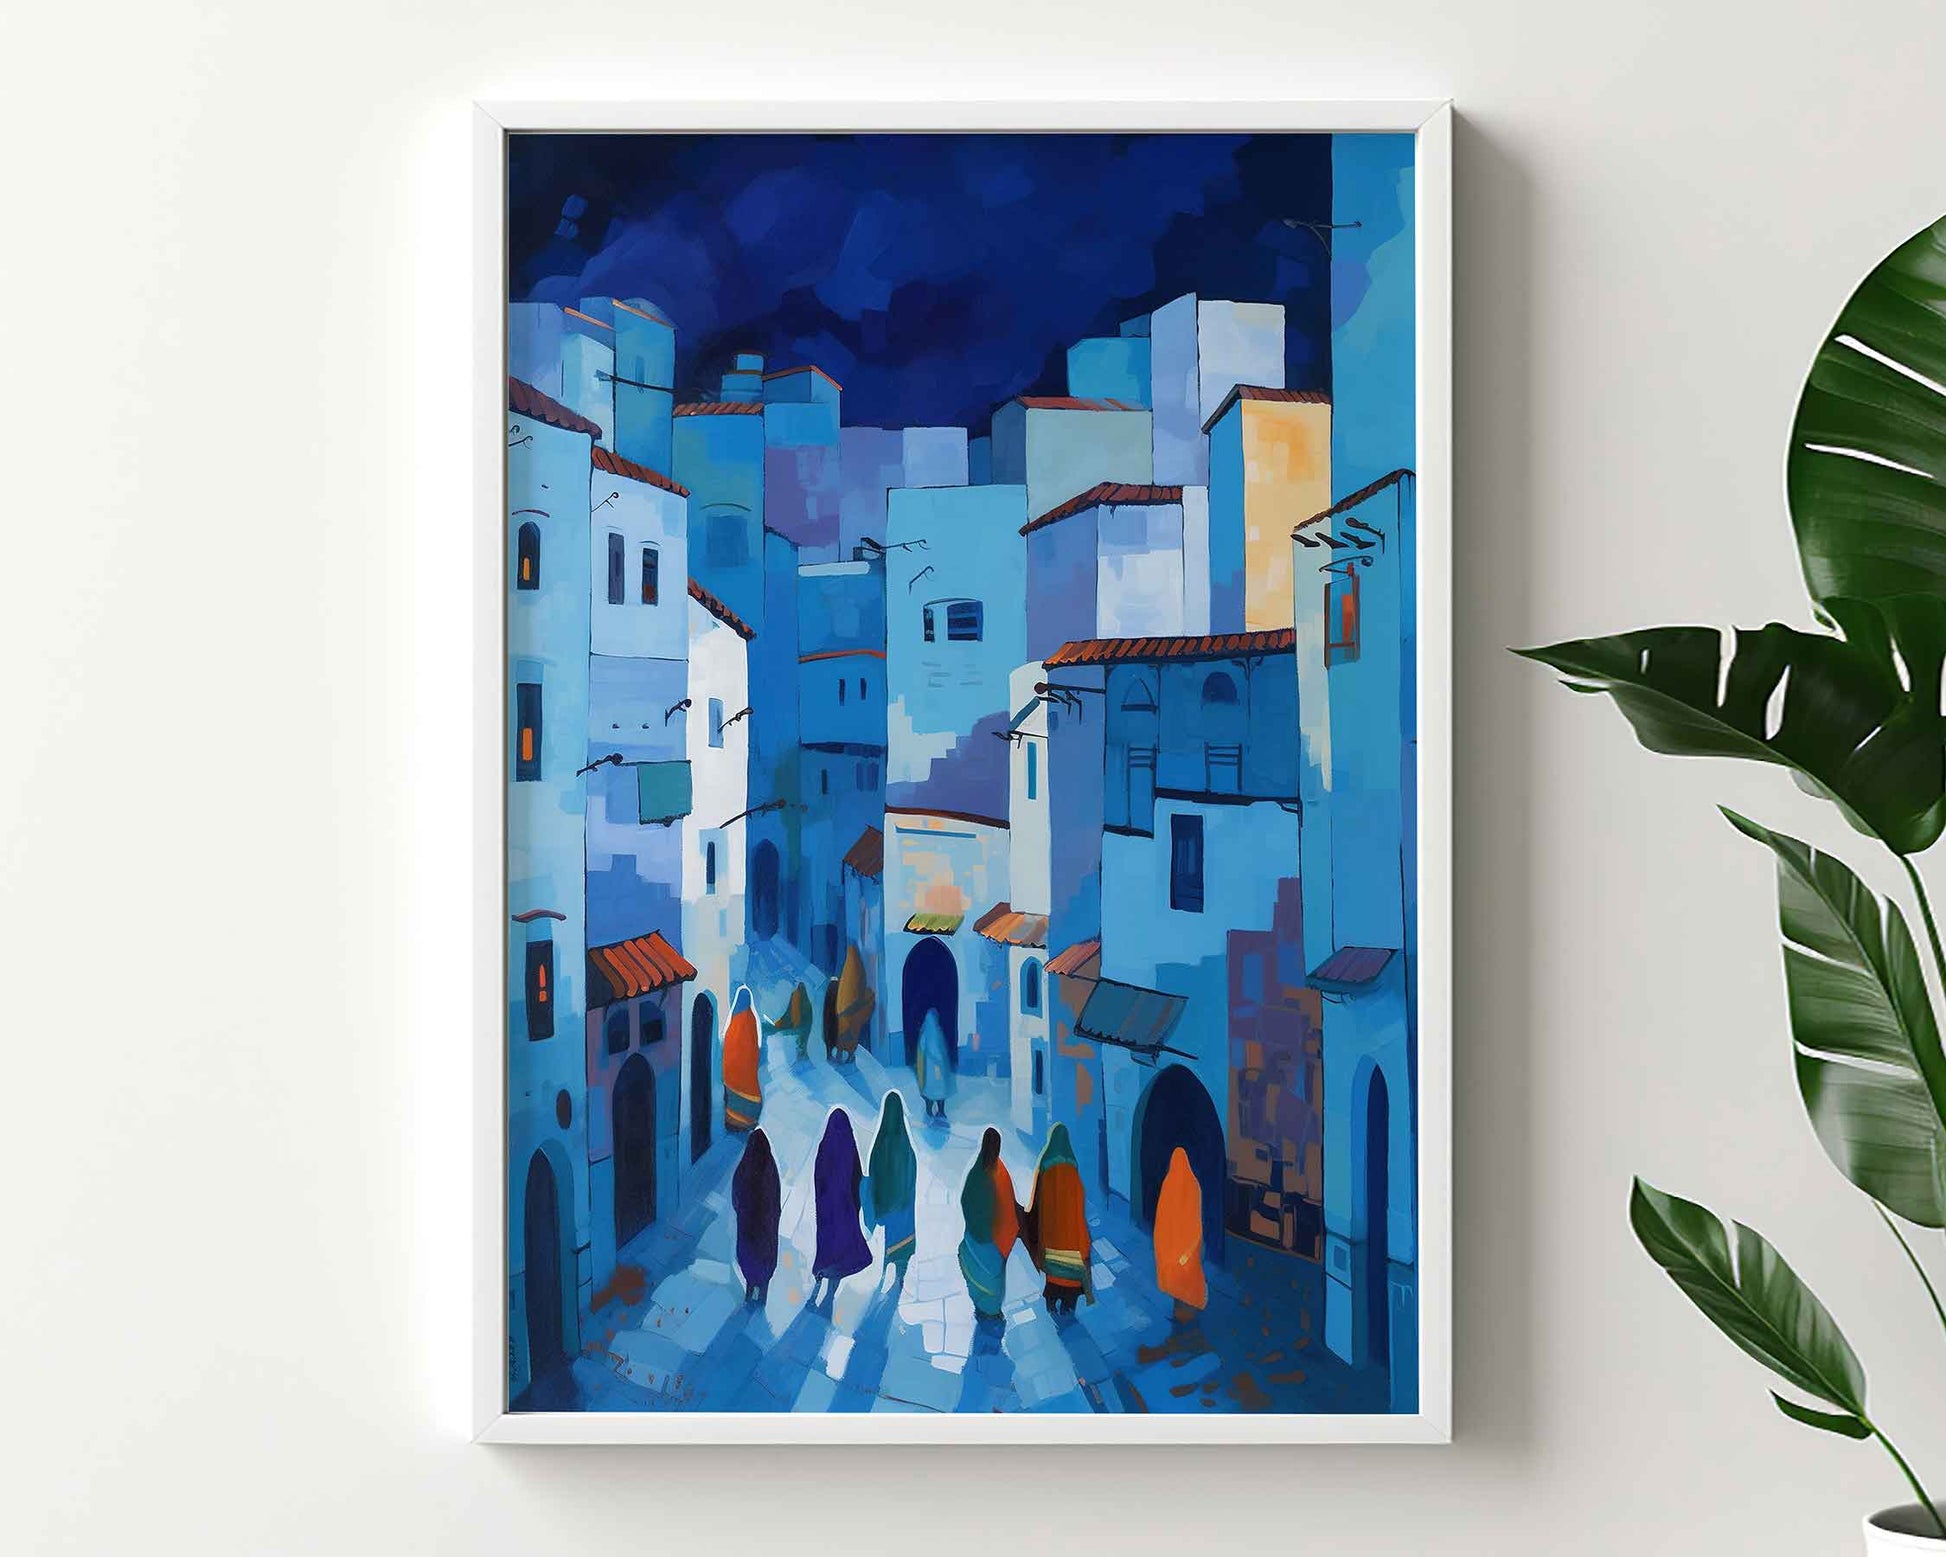 Framed Image of Chefchaouen Blue Streets of Morocco Colourful Abstract Wall Art Prints